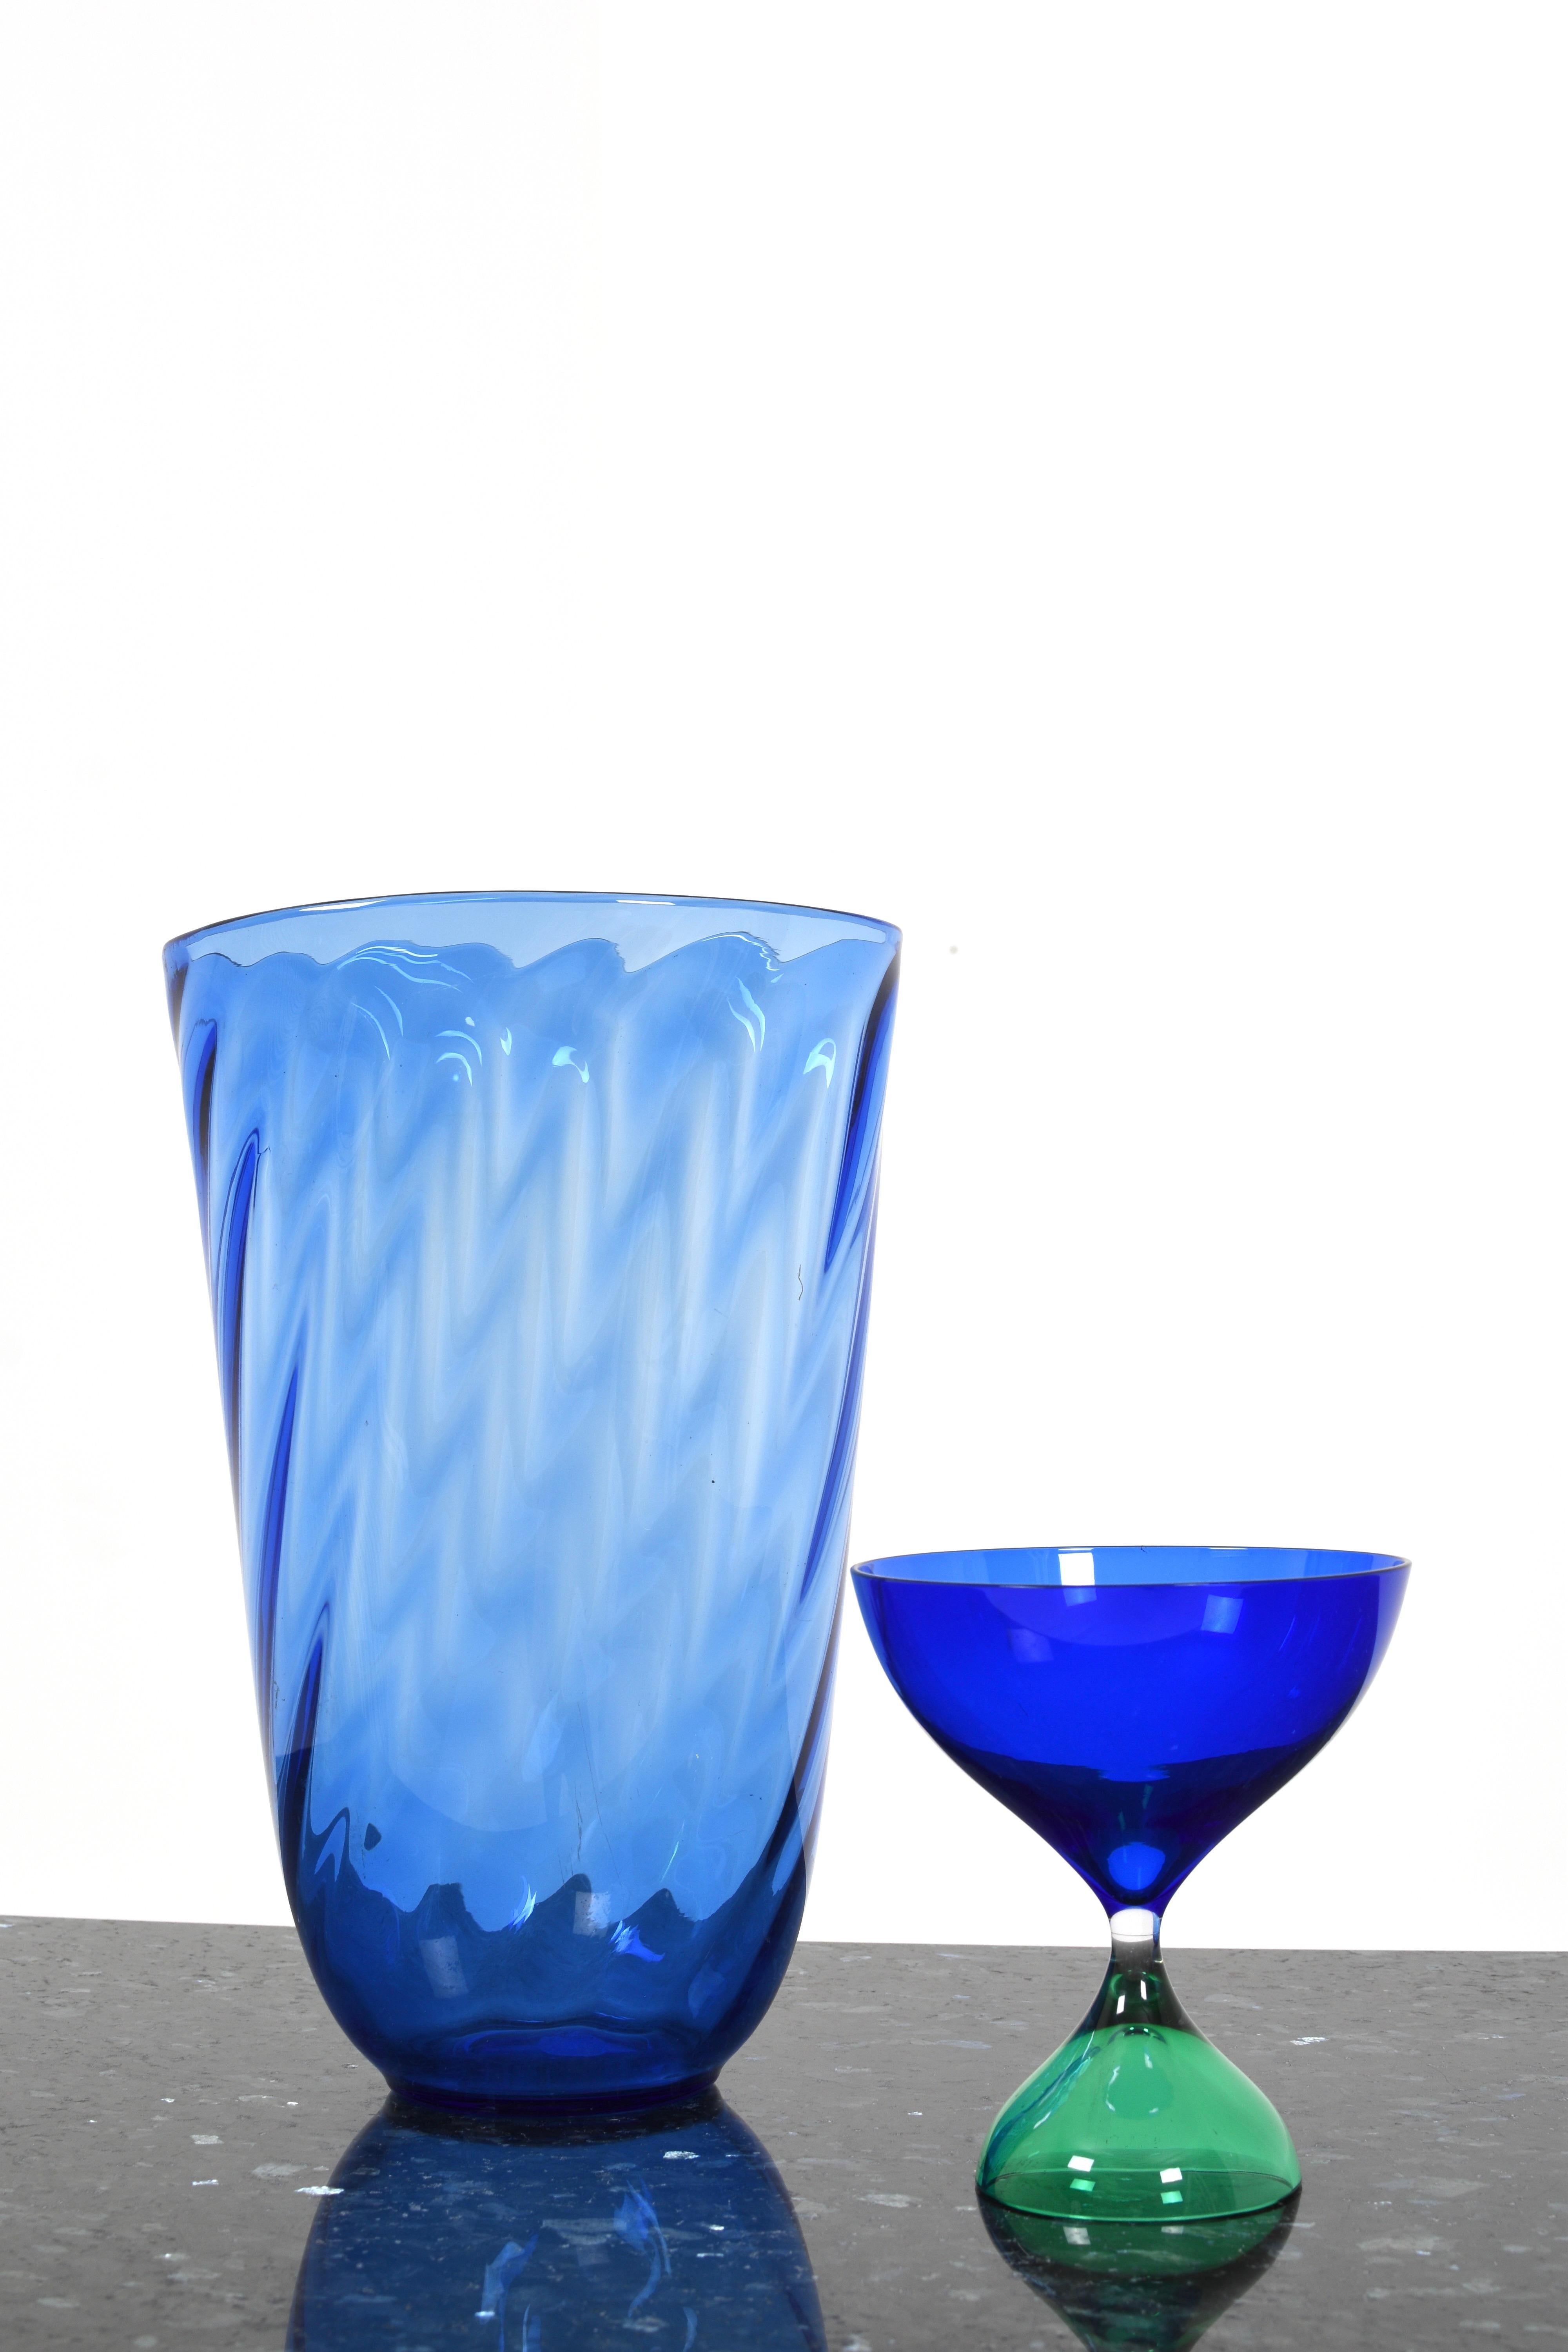 Blue glass vase from Reijmyre Glasbruk is an elegant and timeless ornament for your home. This beautiful vase is made with great skill and attention to detail by Reijmyre's experienced glass craftsmen and represents the best of Swedish